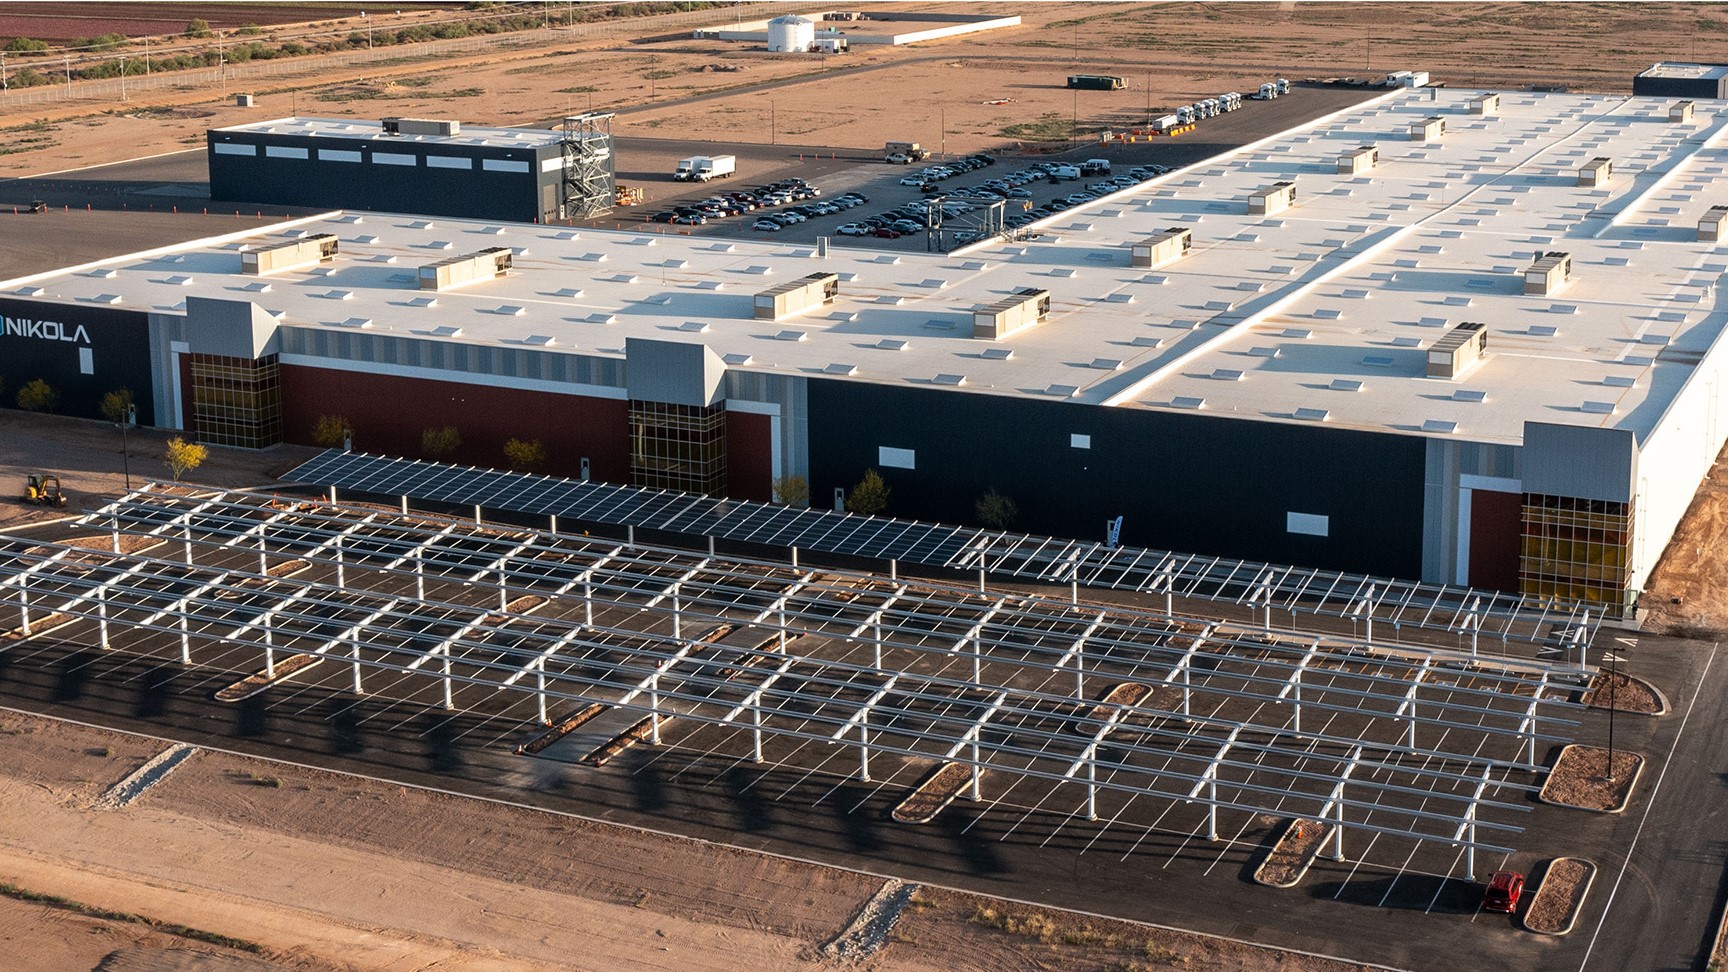 Aerial view of Nikola plant with solar panels